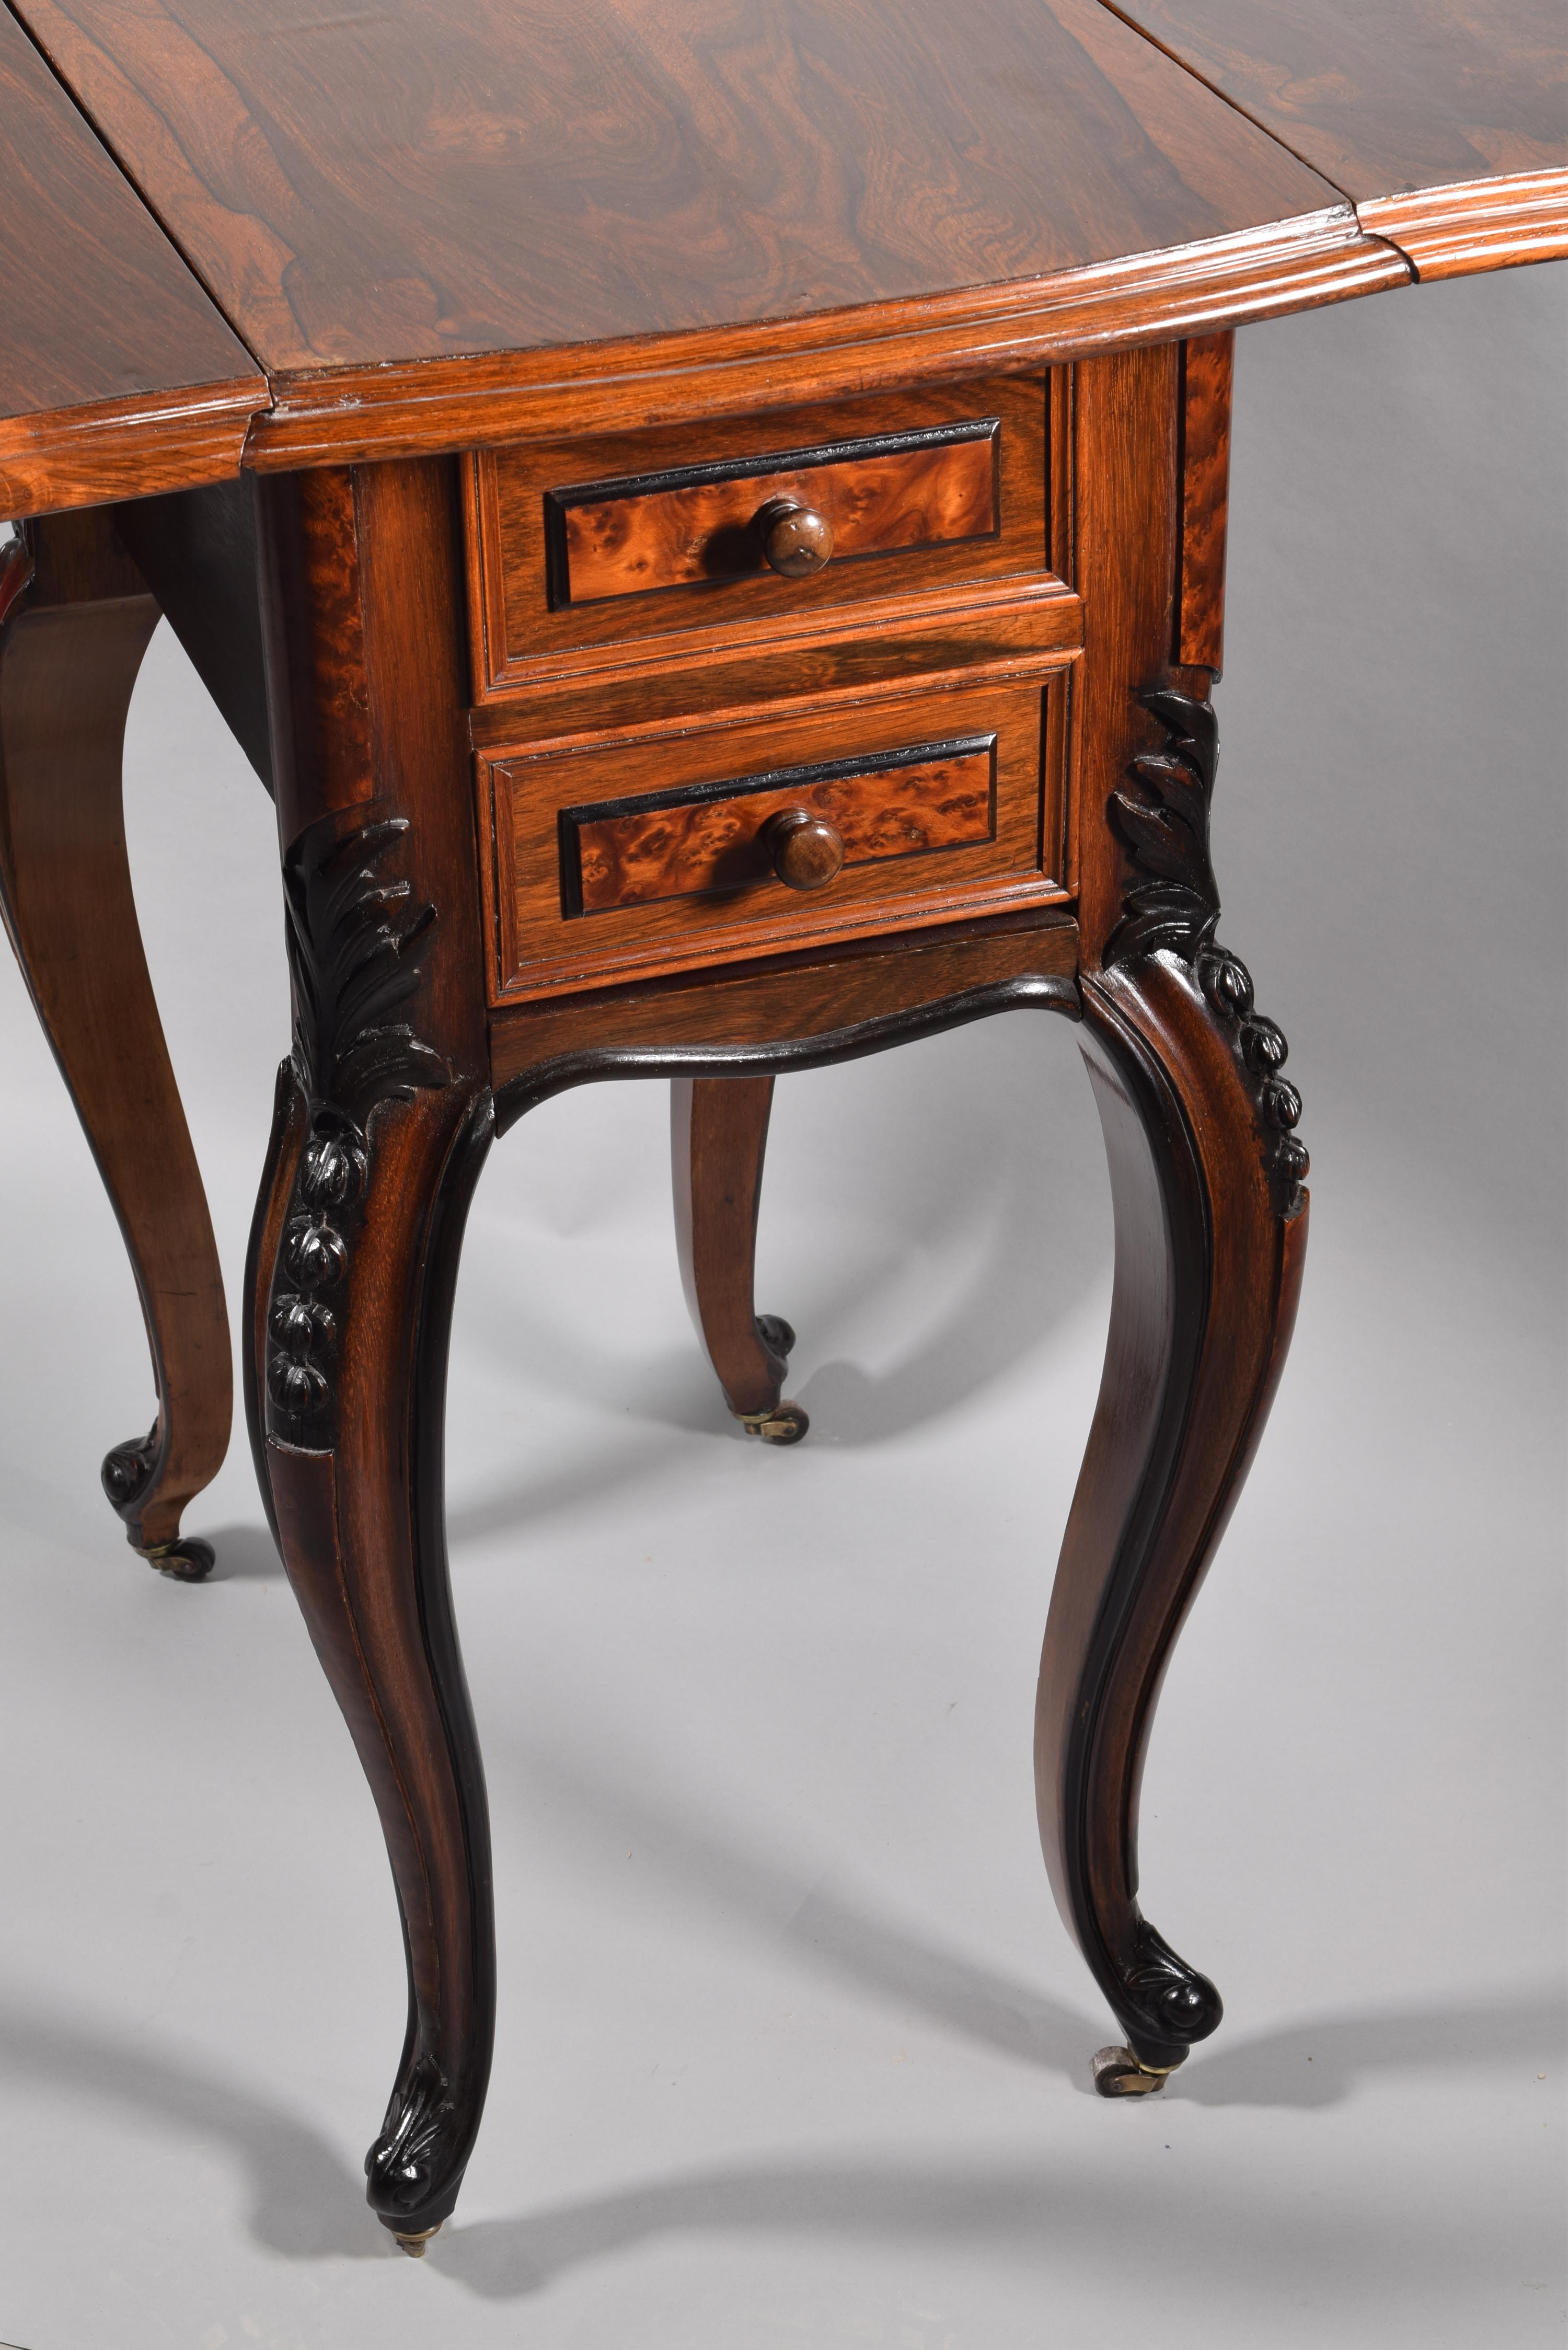 Sewing Table with Wings, Palosanto or Rosewood Wood, 19th Century For Sale 5